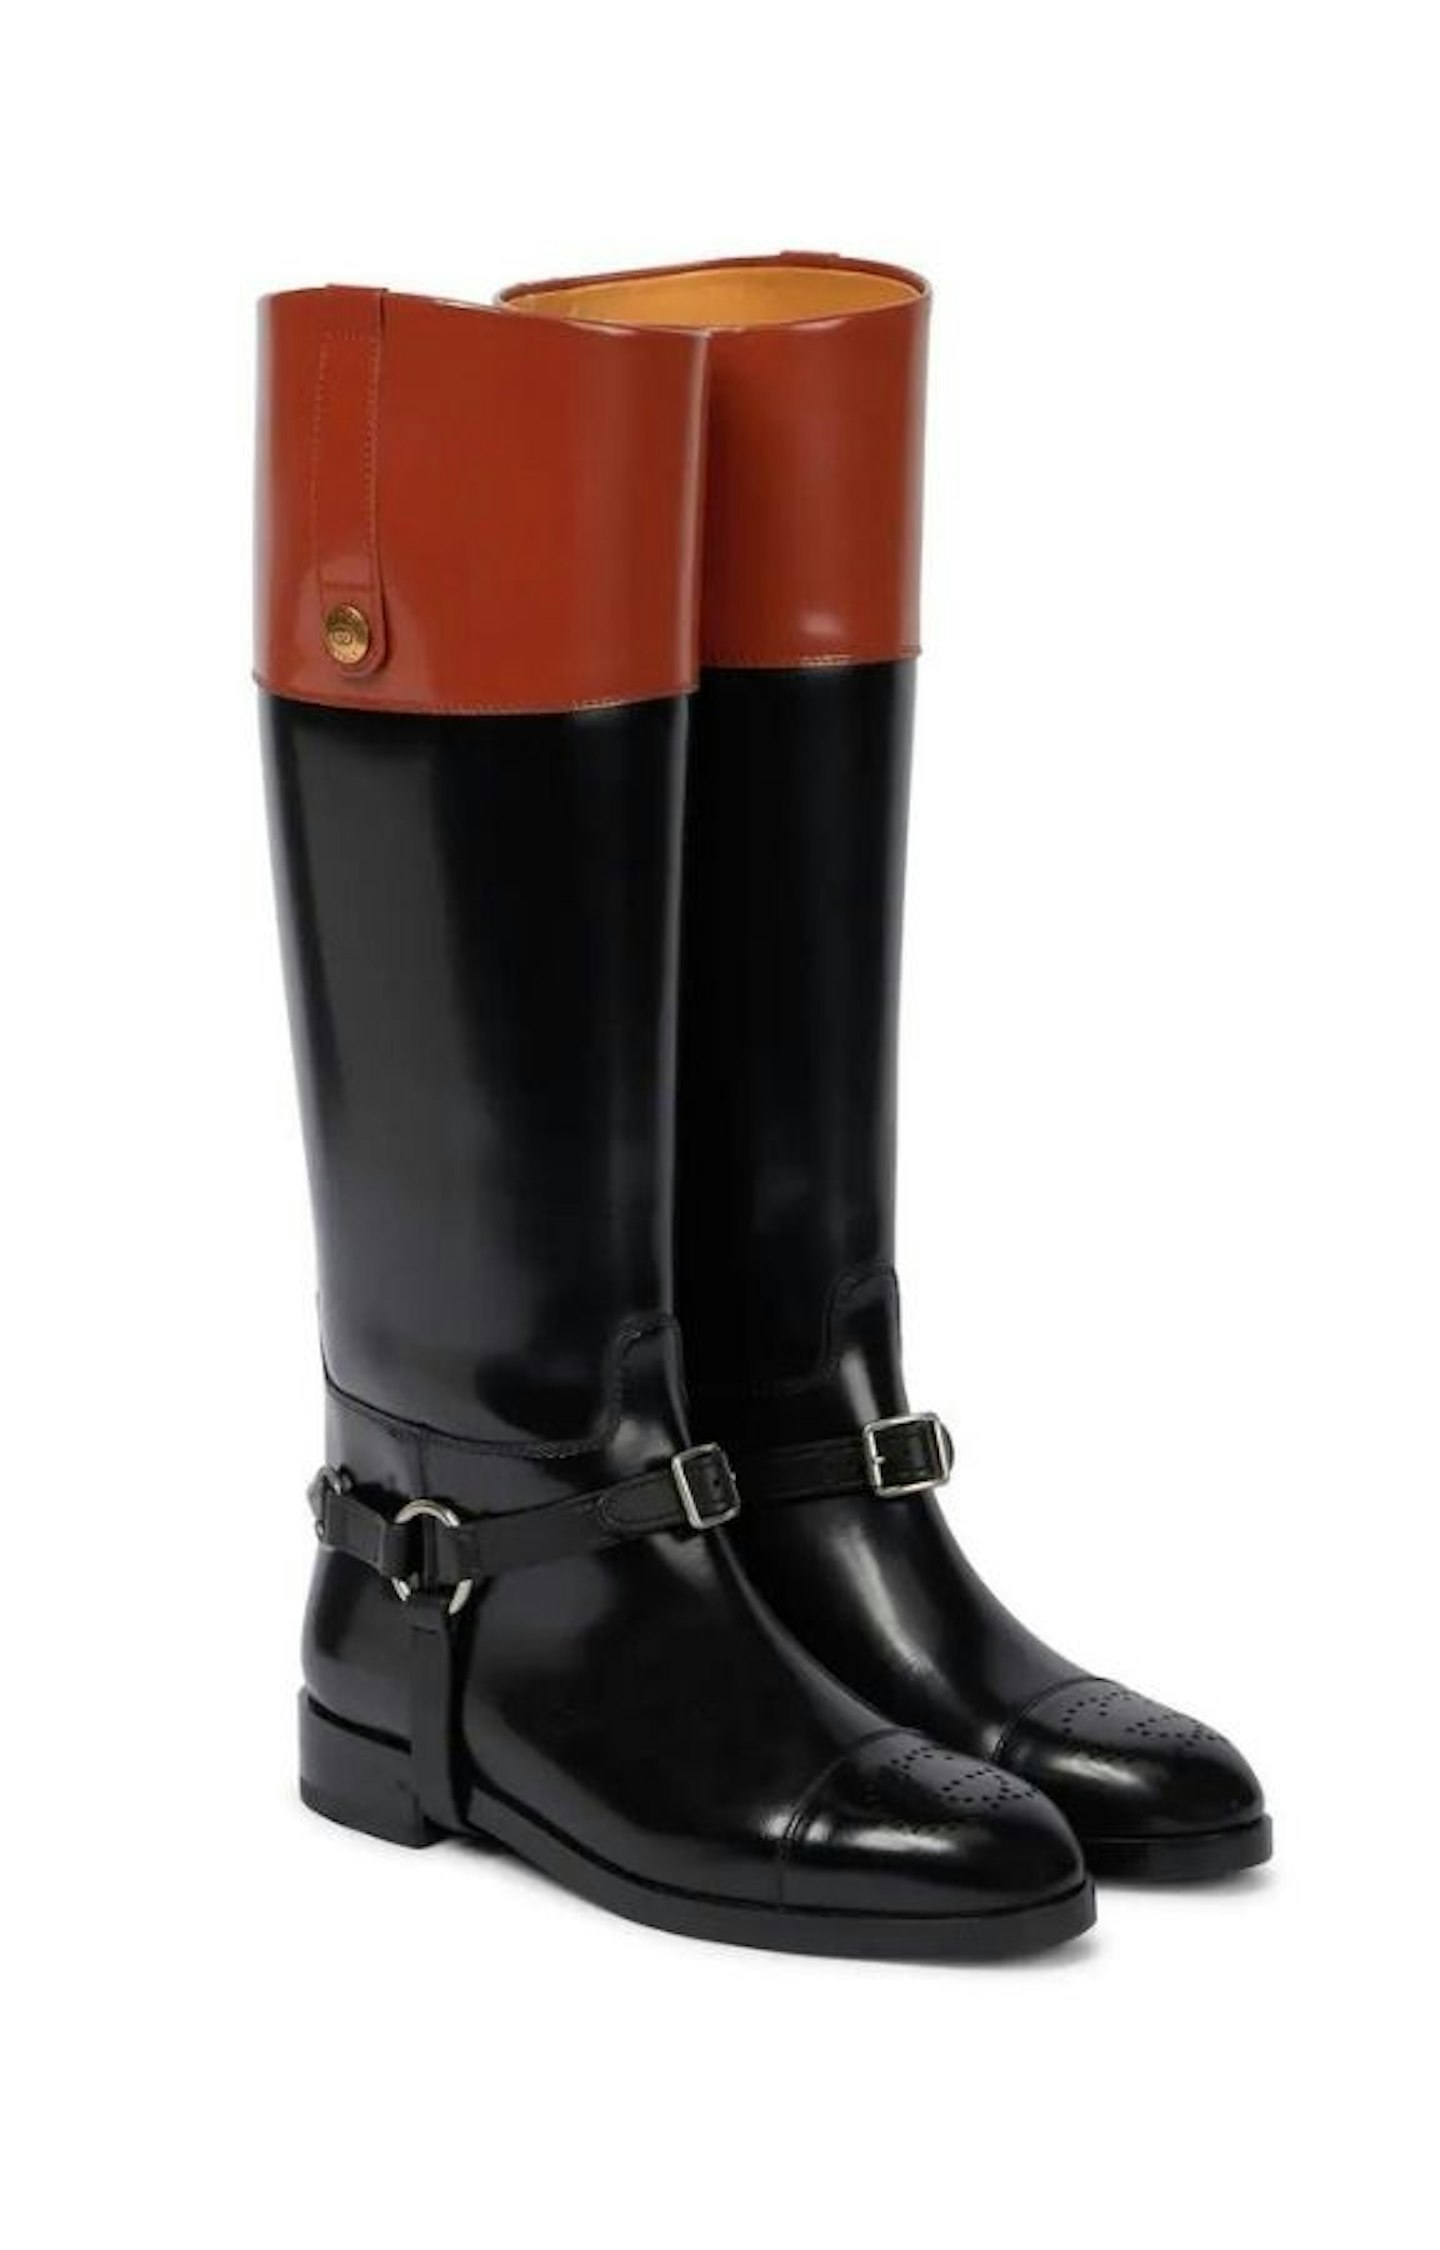 Gucci Leather knee-high boots